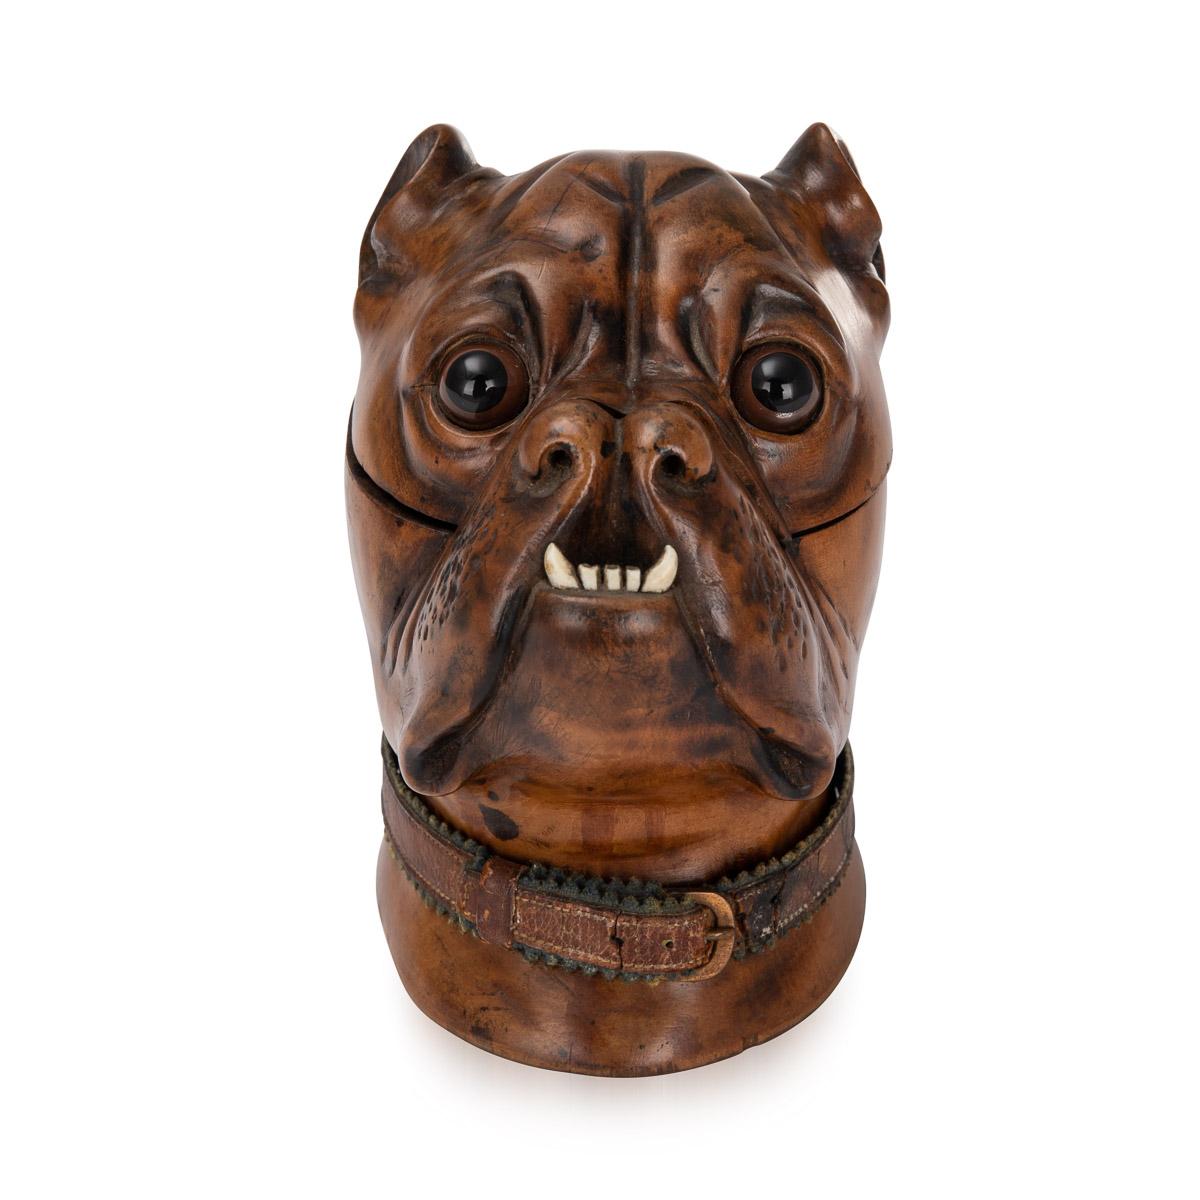 Antique 19th century Victorian lignum vitae inkwell modelled as the head of a bulldog with realistic glass inset eyes, original leather collar with a copper buckle and scowling teeth. The head is hinged and opens to reveal an empty ink pot insert